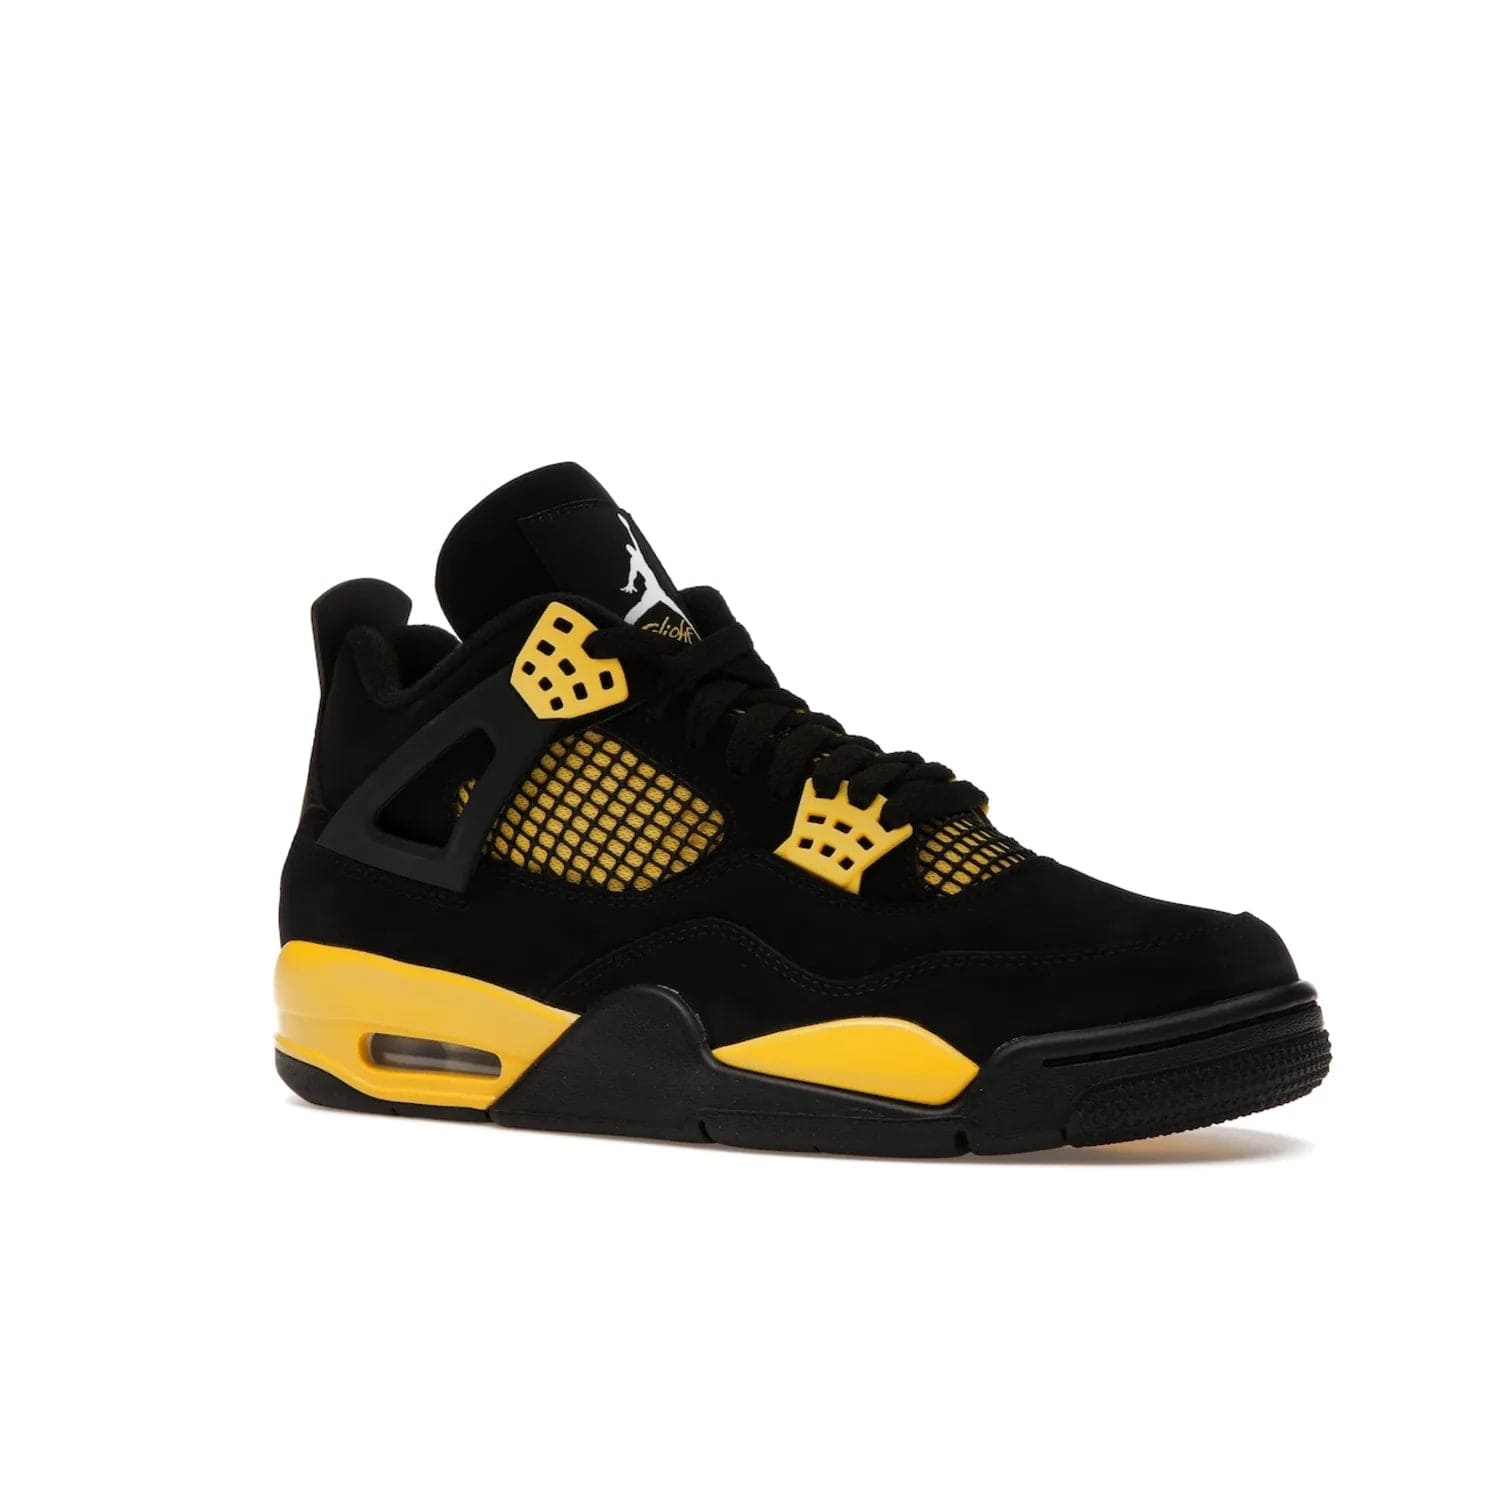 Jordan 4 Retro Thunder (2023) - Image 4 - Only at www.BallersClubKickz.com - Iconic Air Jordan 4 Retro Thunder (2023) returns with black nubuck upper and Tour Yellow details. Featuring Jumpman logo on heel tab, tongue and insoles. Dropping May 13th, 2023.